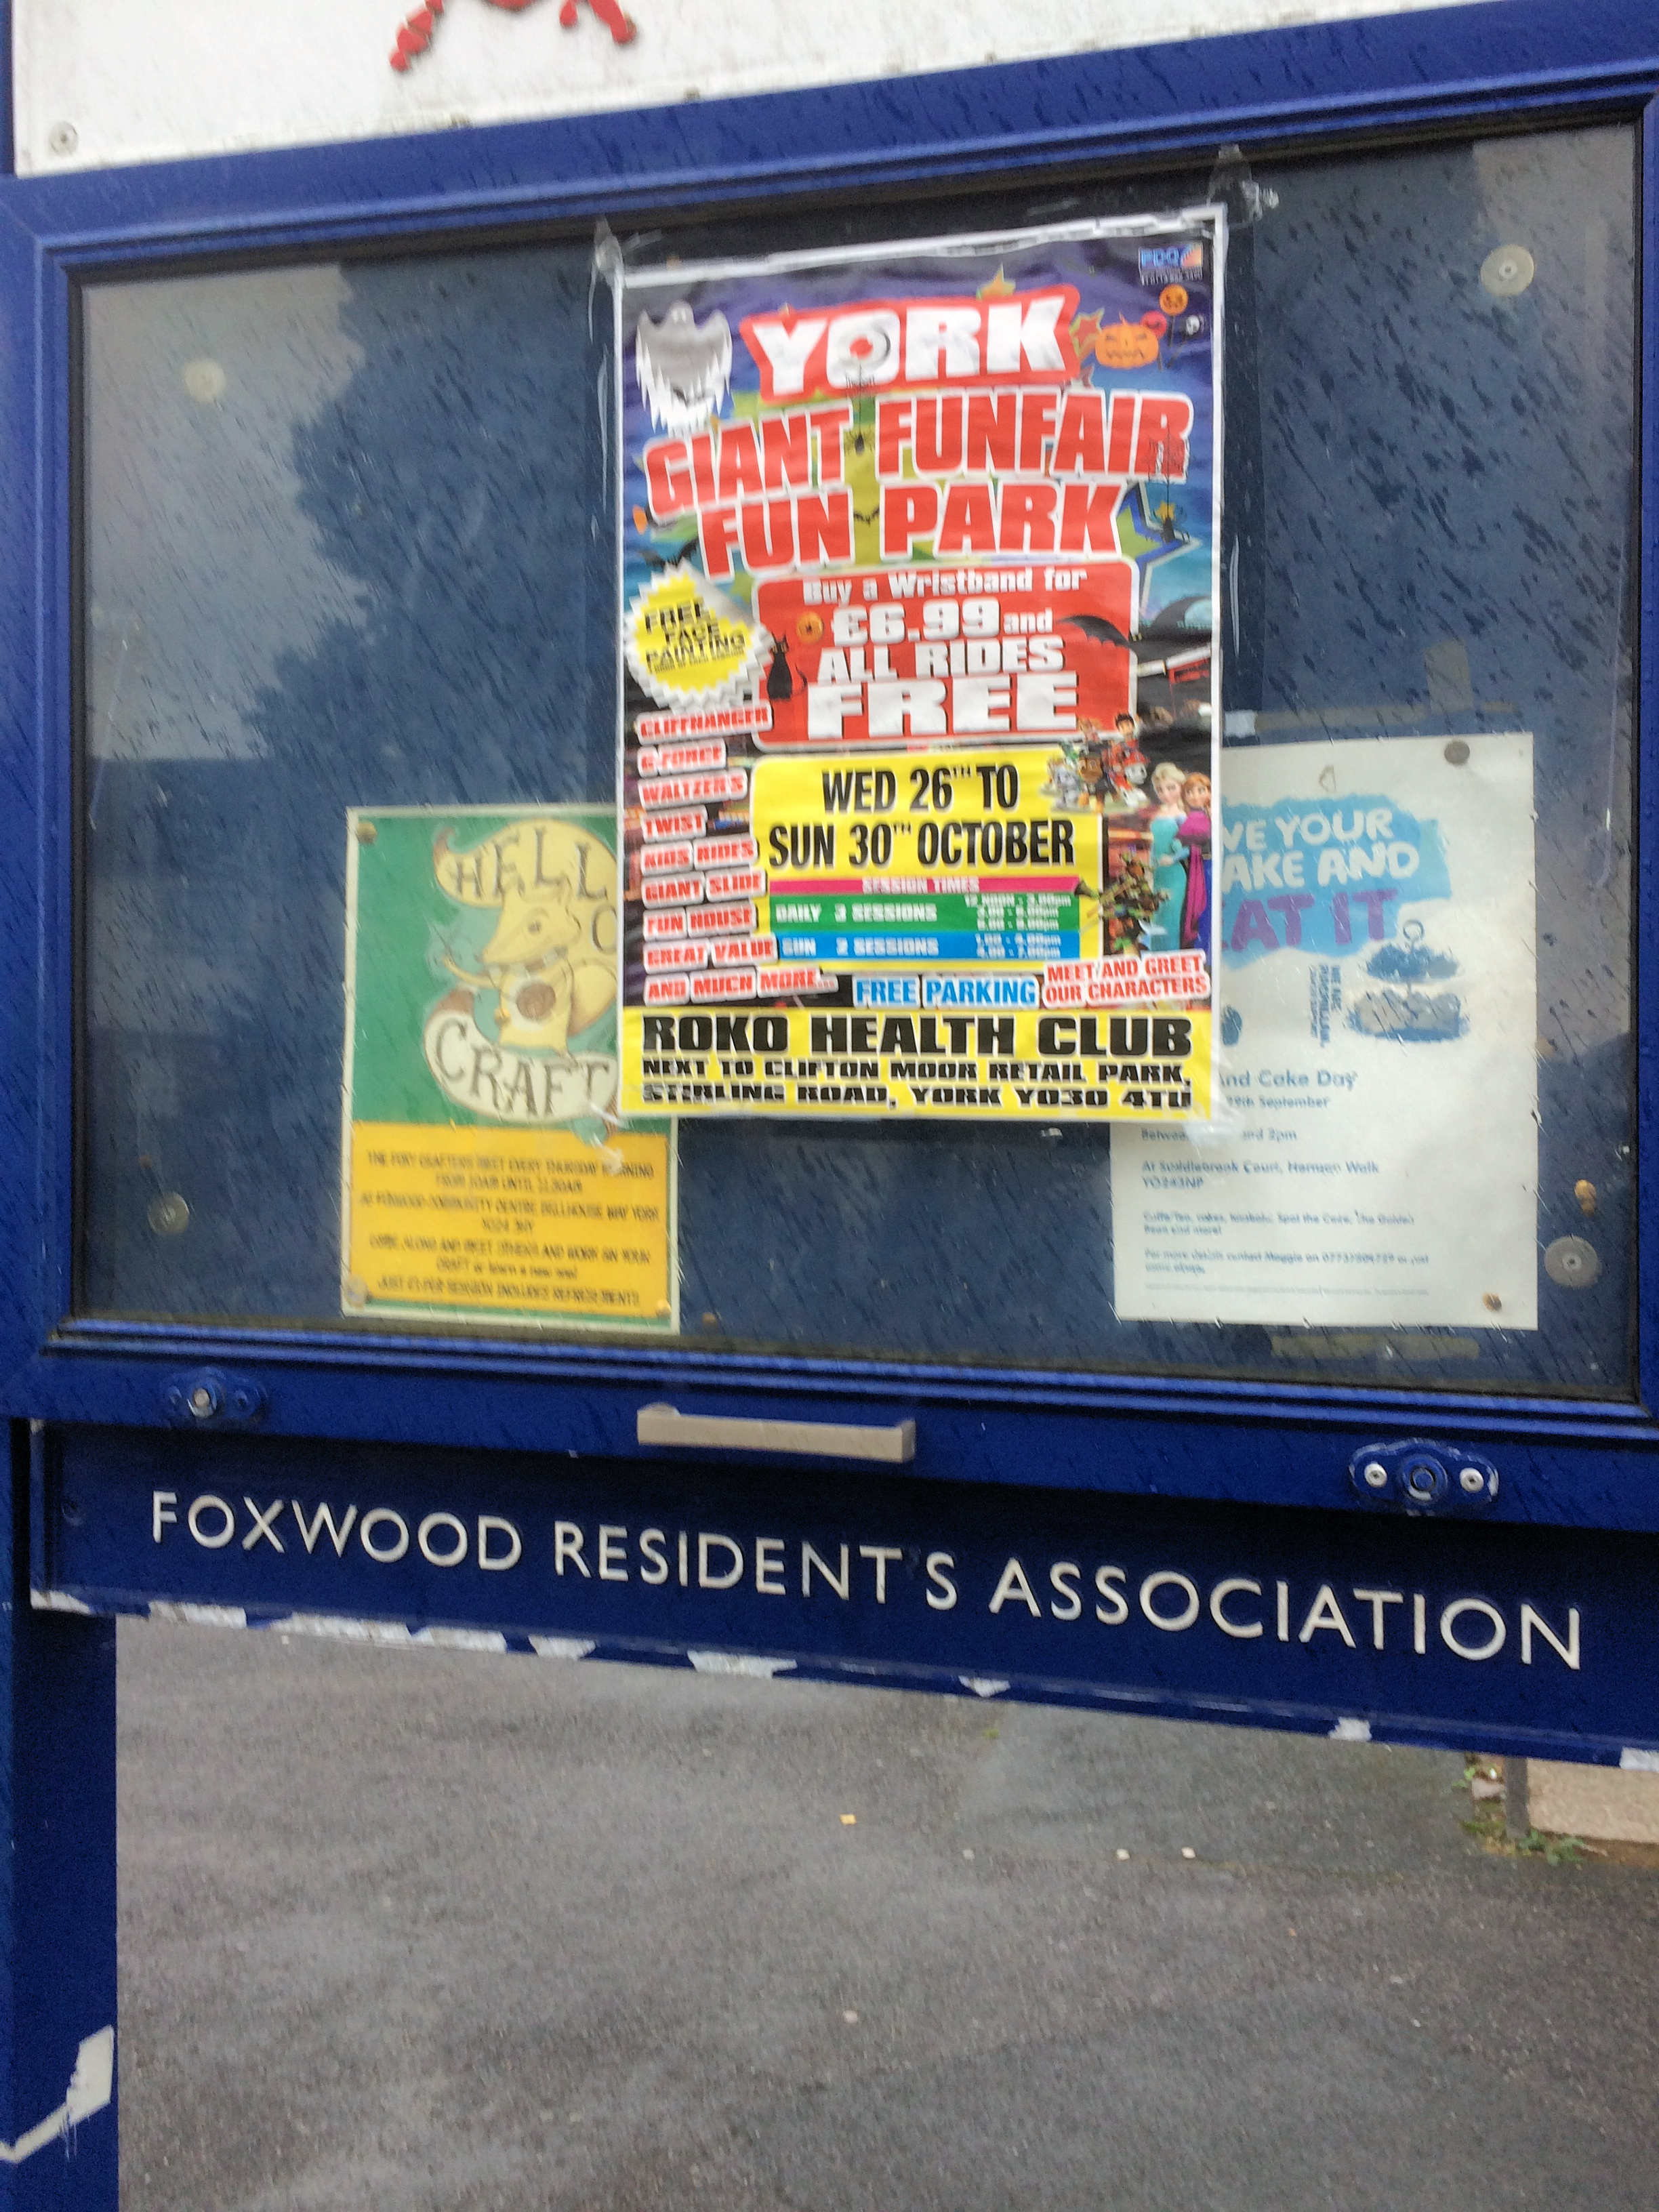 More fly posting., This time advertising a fair taking place in Clifton